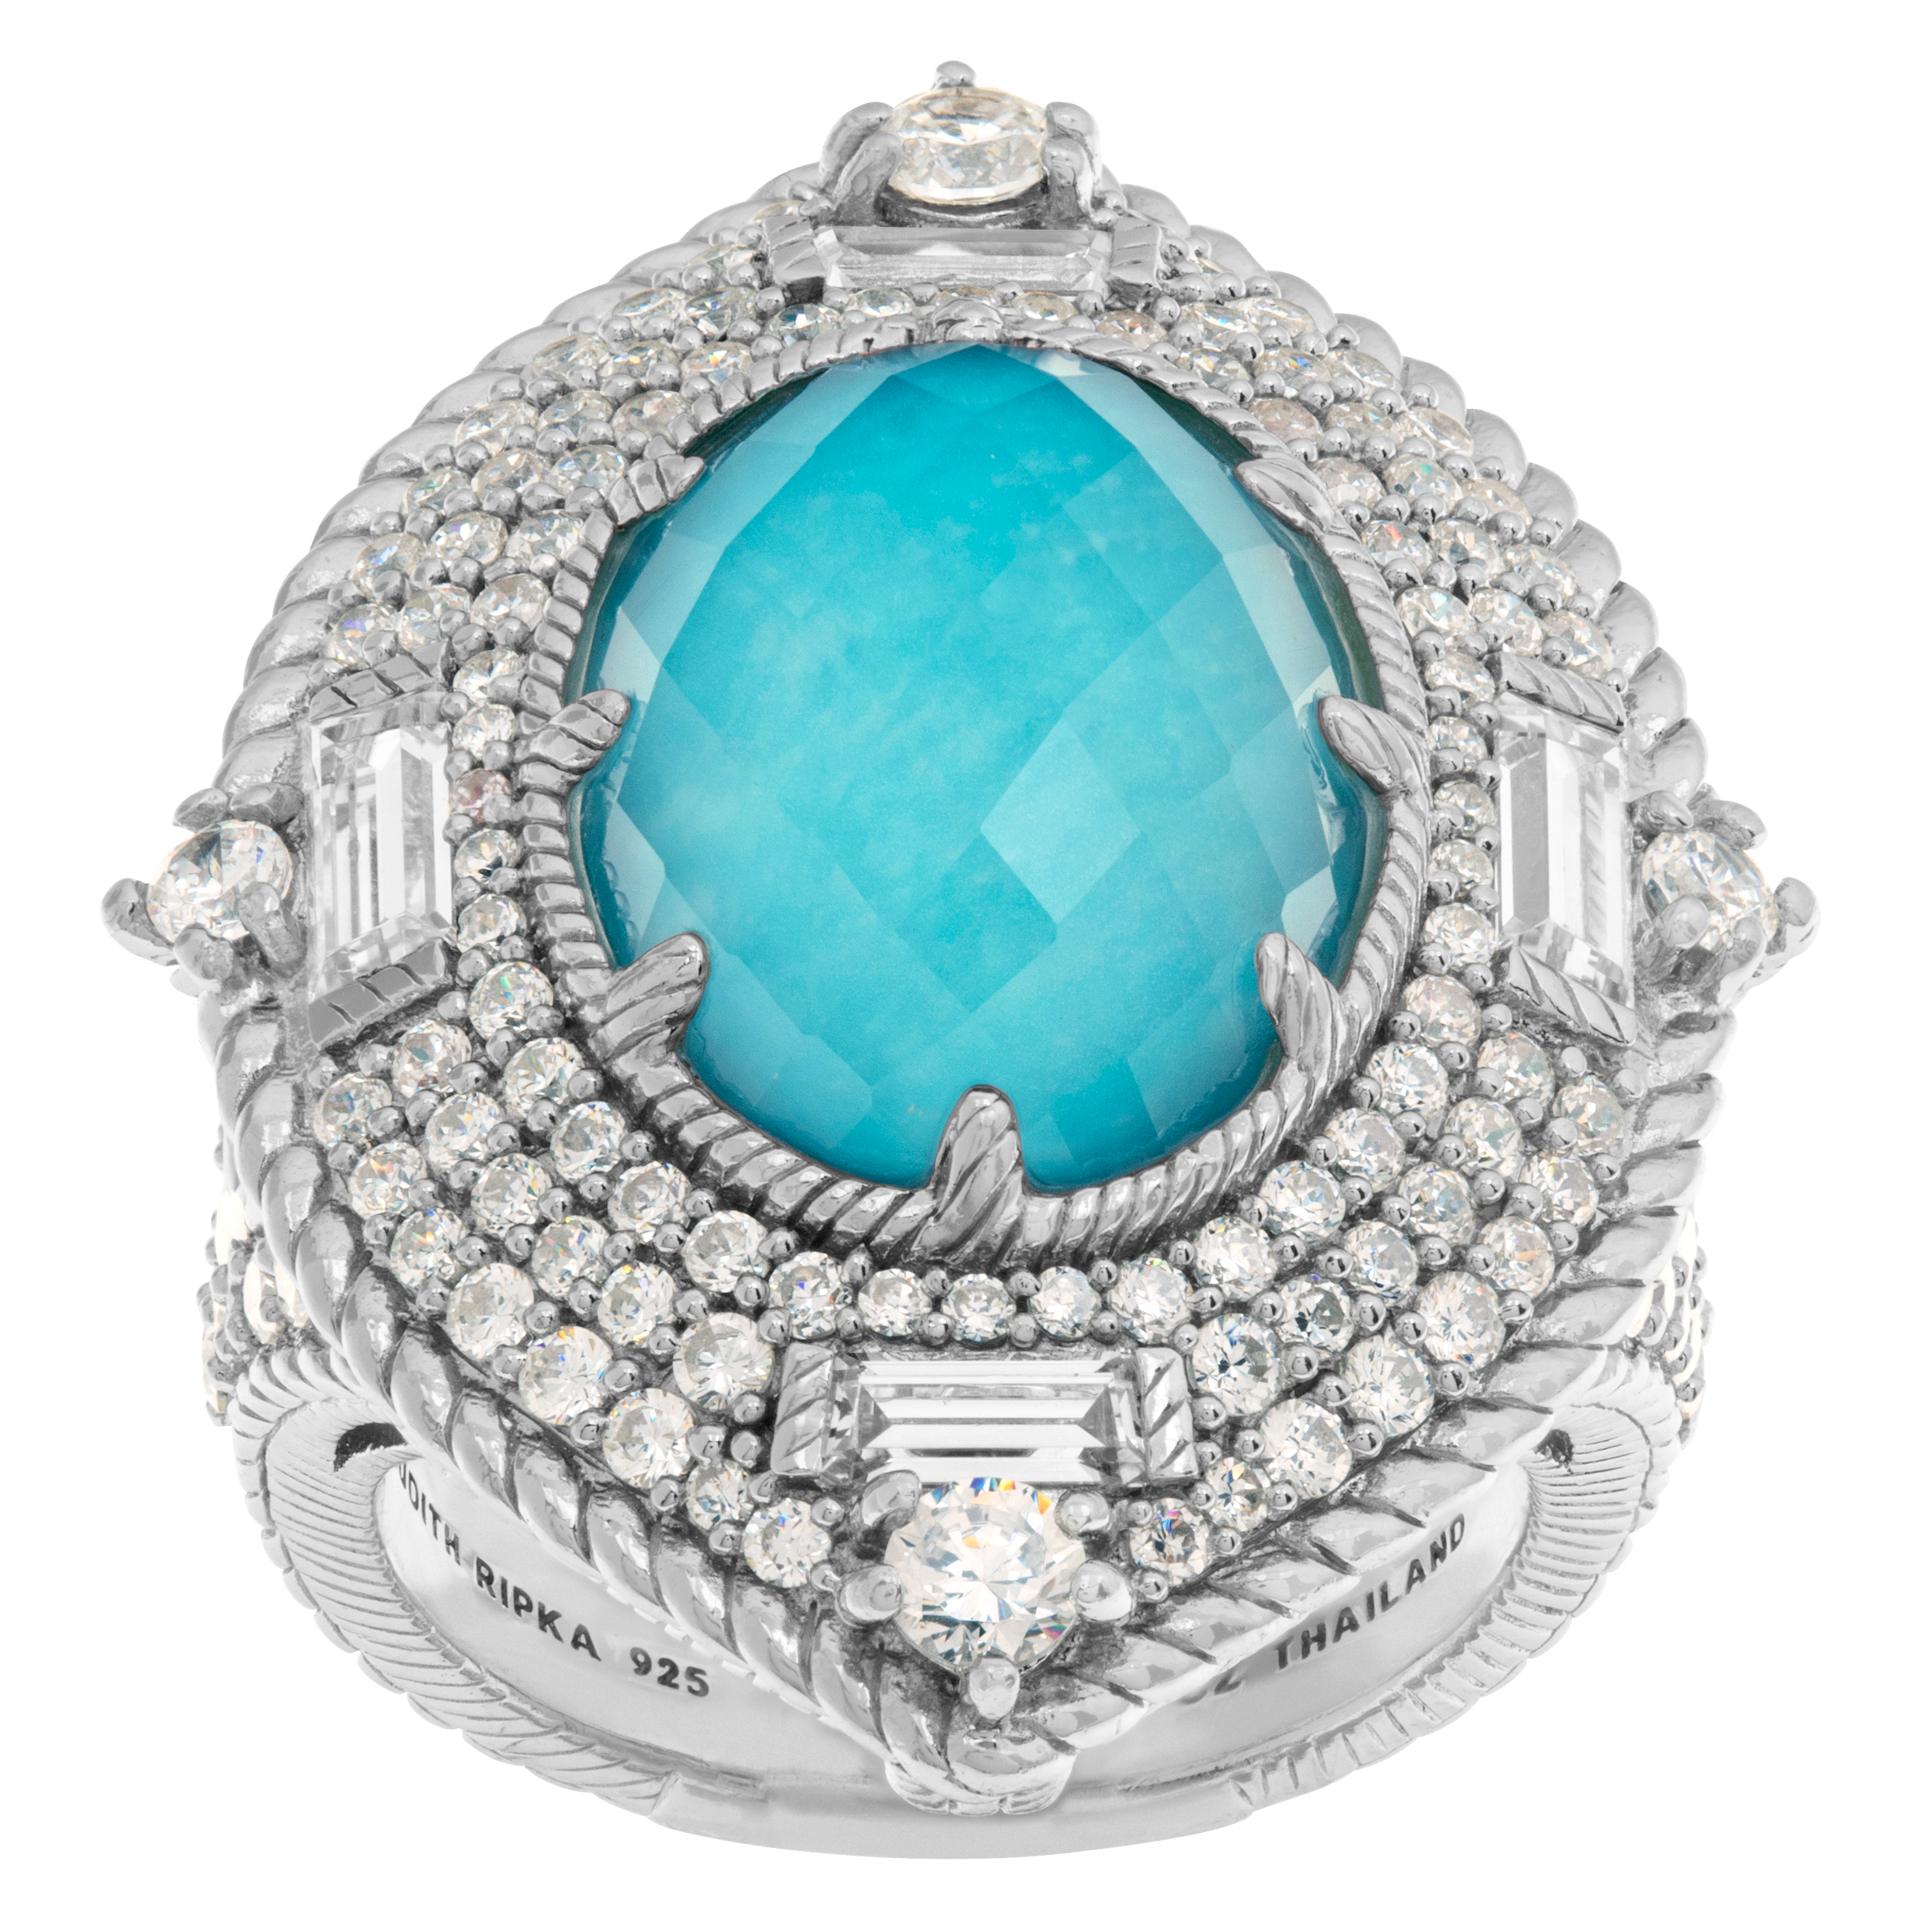 Judith Ripka ring with faceted blue topaz and cz white stones in sterling silver